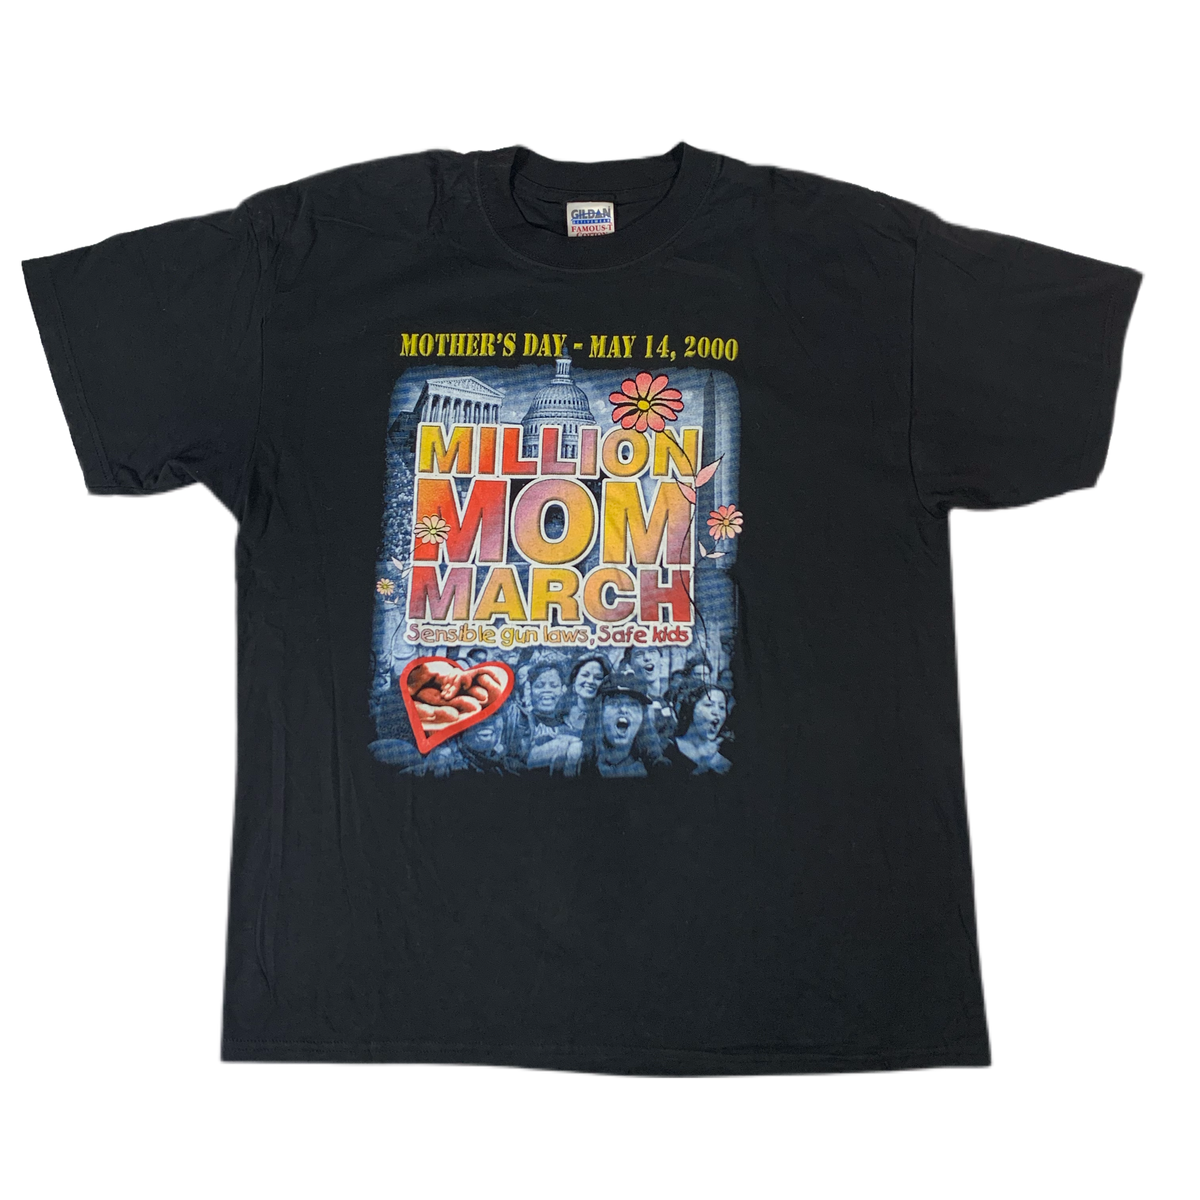 Vintage Million Mom March “Mother’s Day 2000” T-Shirt - jointcustodydc